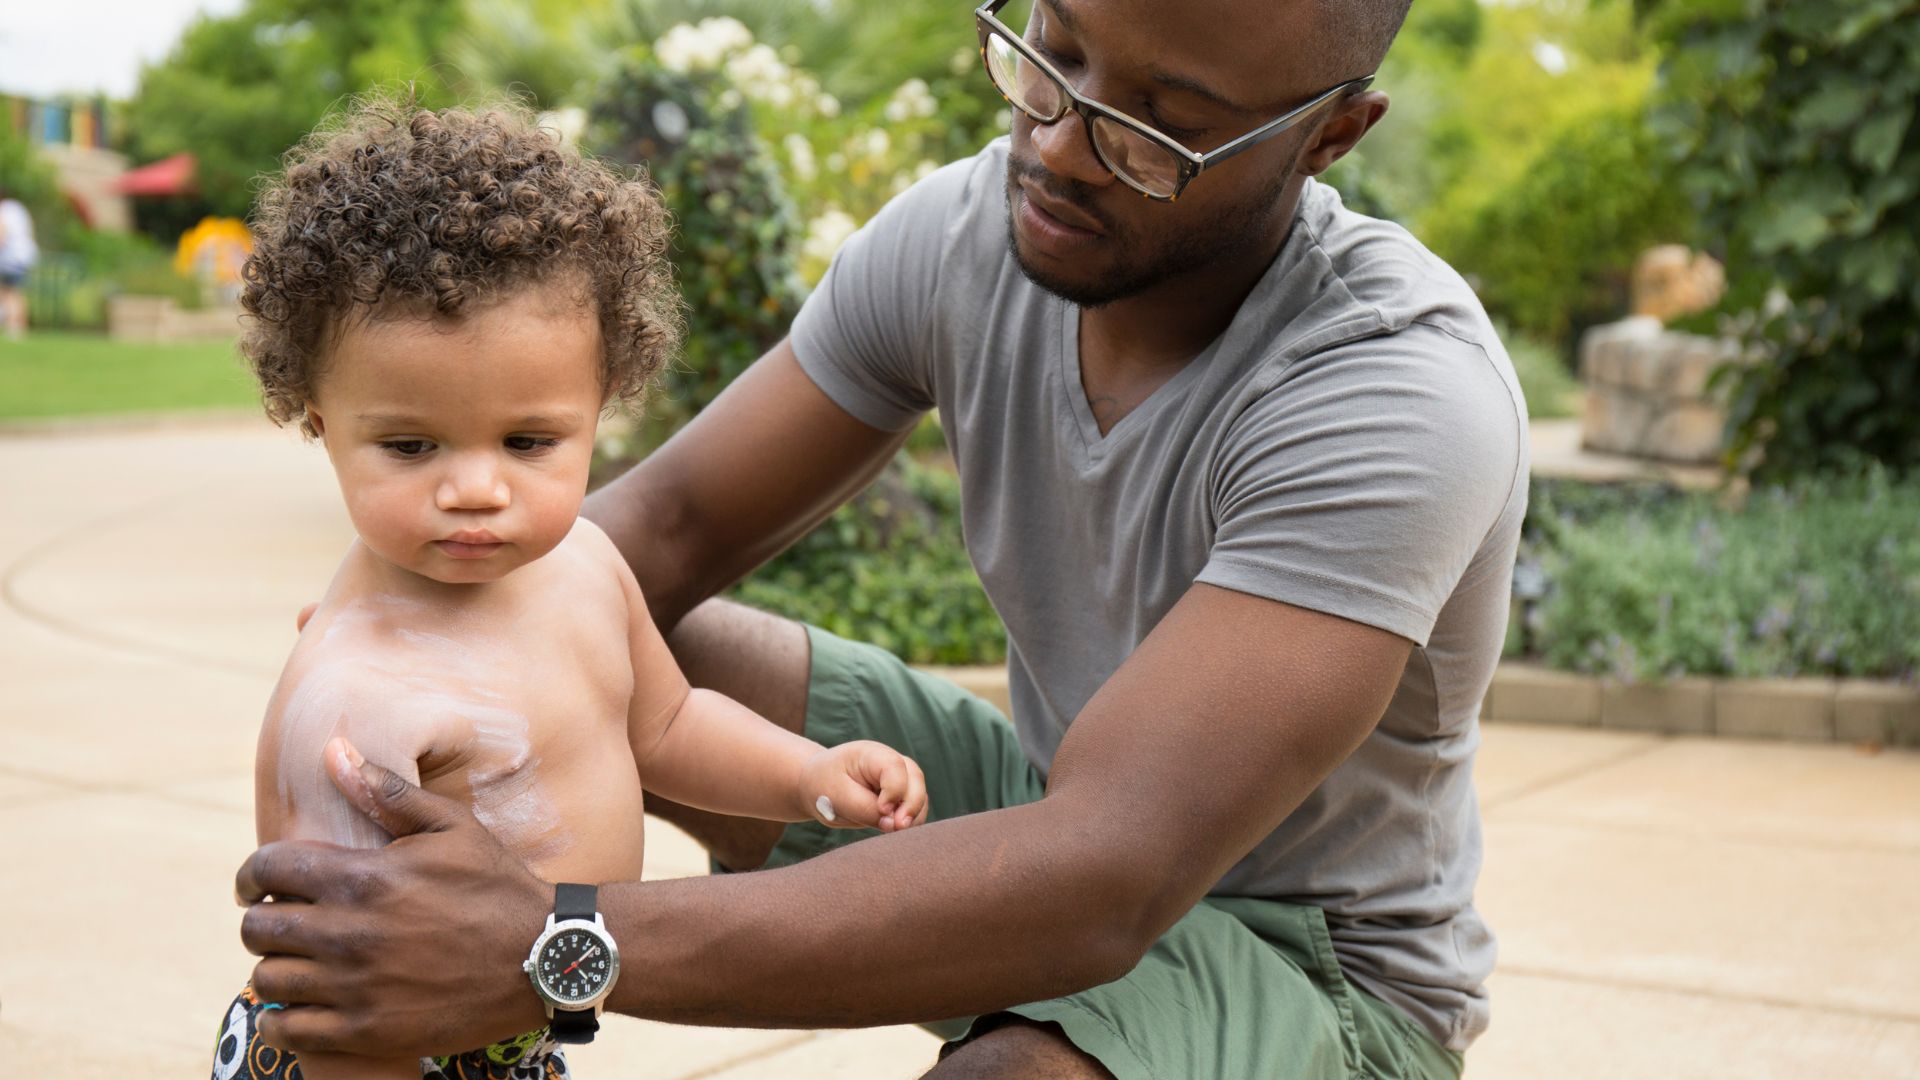 young father wearing glasses and a t shirt applies sunscreen to his toddler son's skin while both stand outside in a driveway